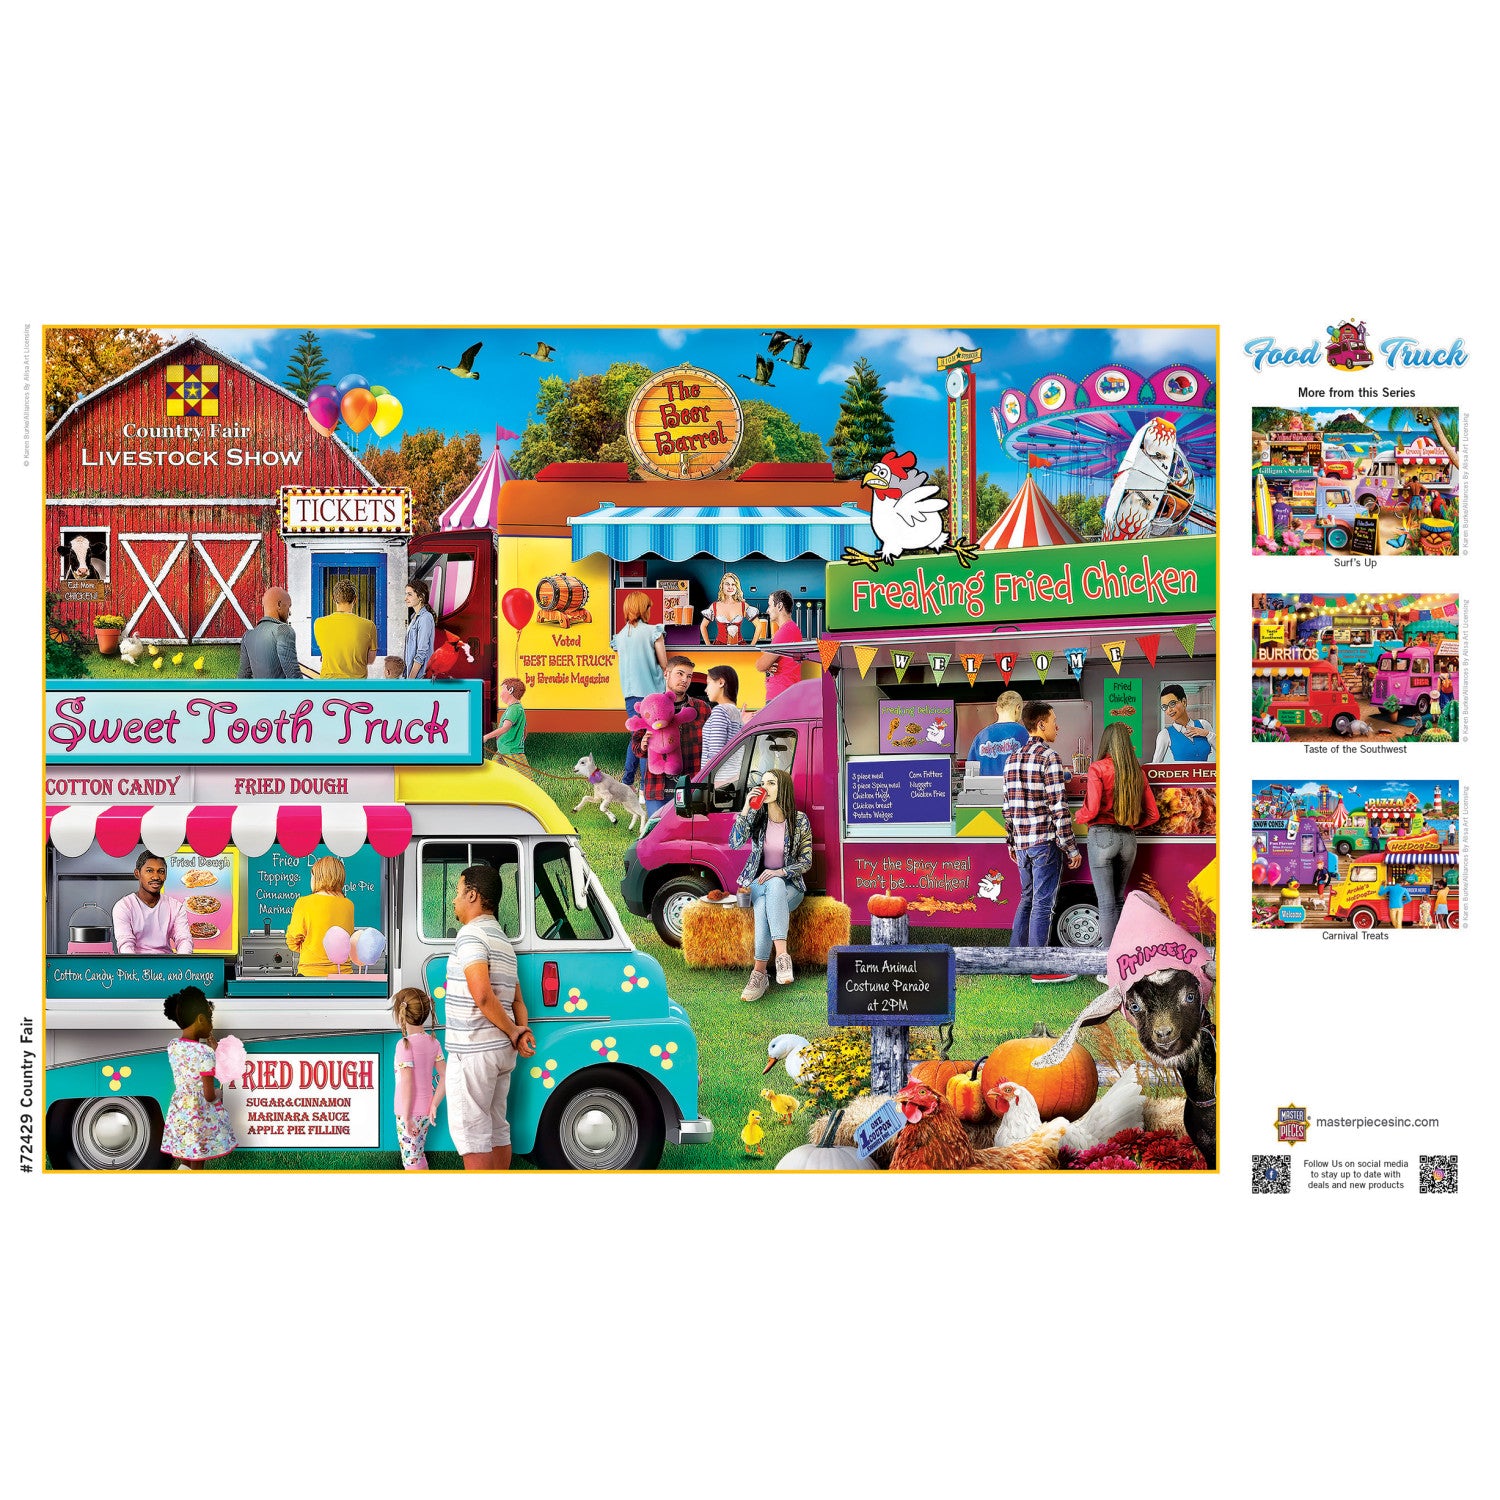 Food Truck Roundup - Country Fair 1000 Piece Jigsaw Puzzle